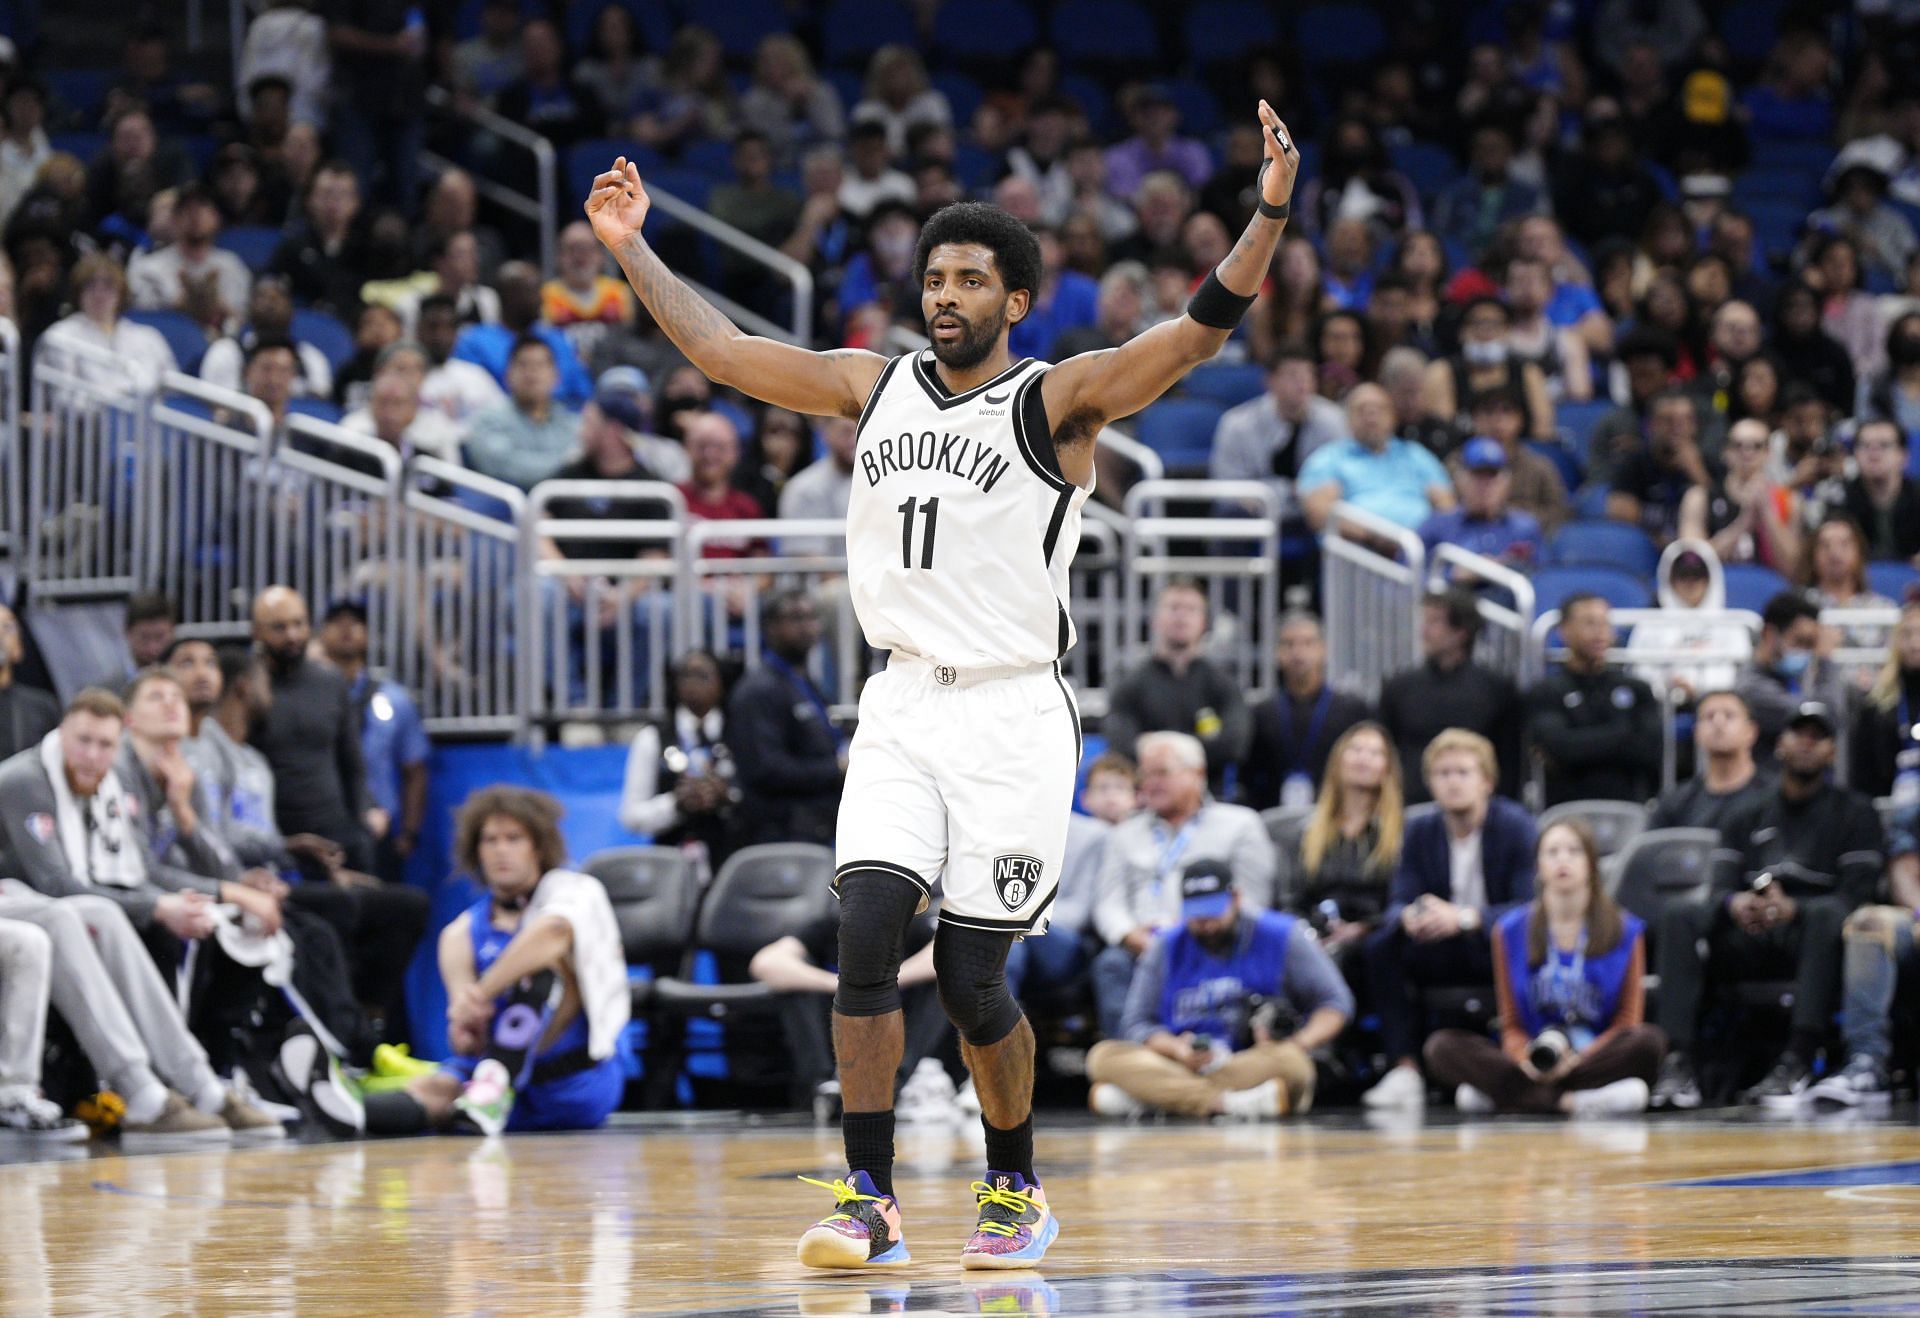 Kyrie Irving of the Brooklyn Nets against the Orlando Magic